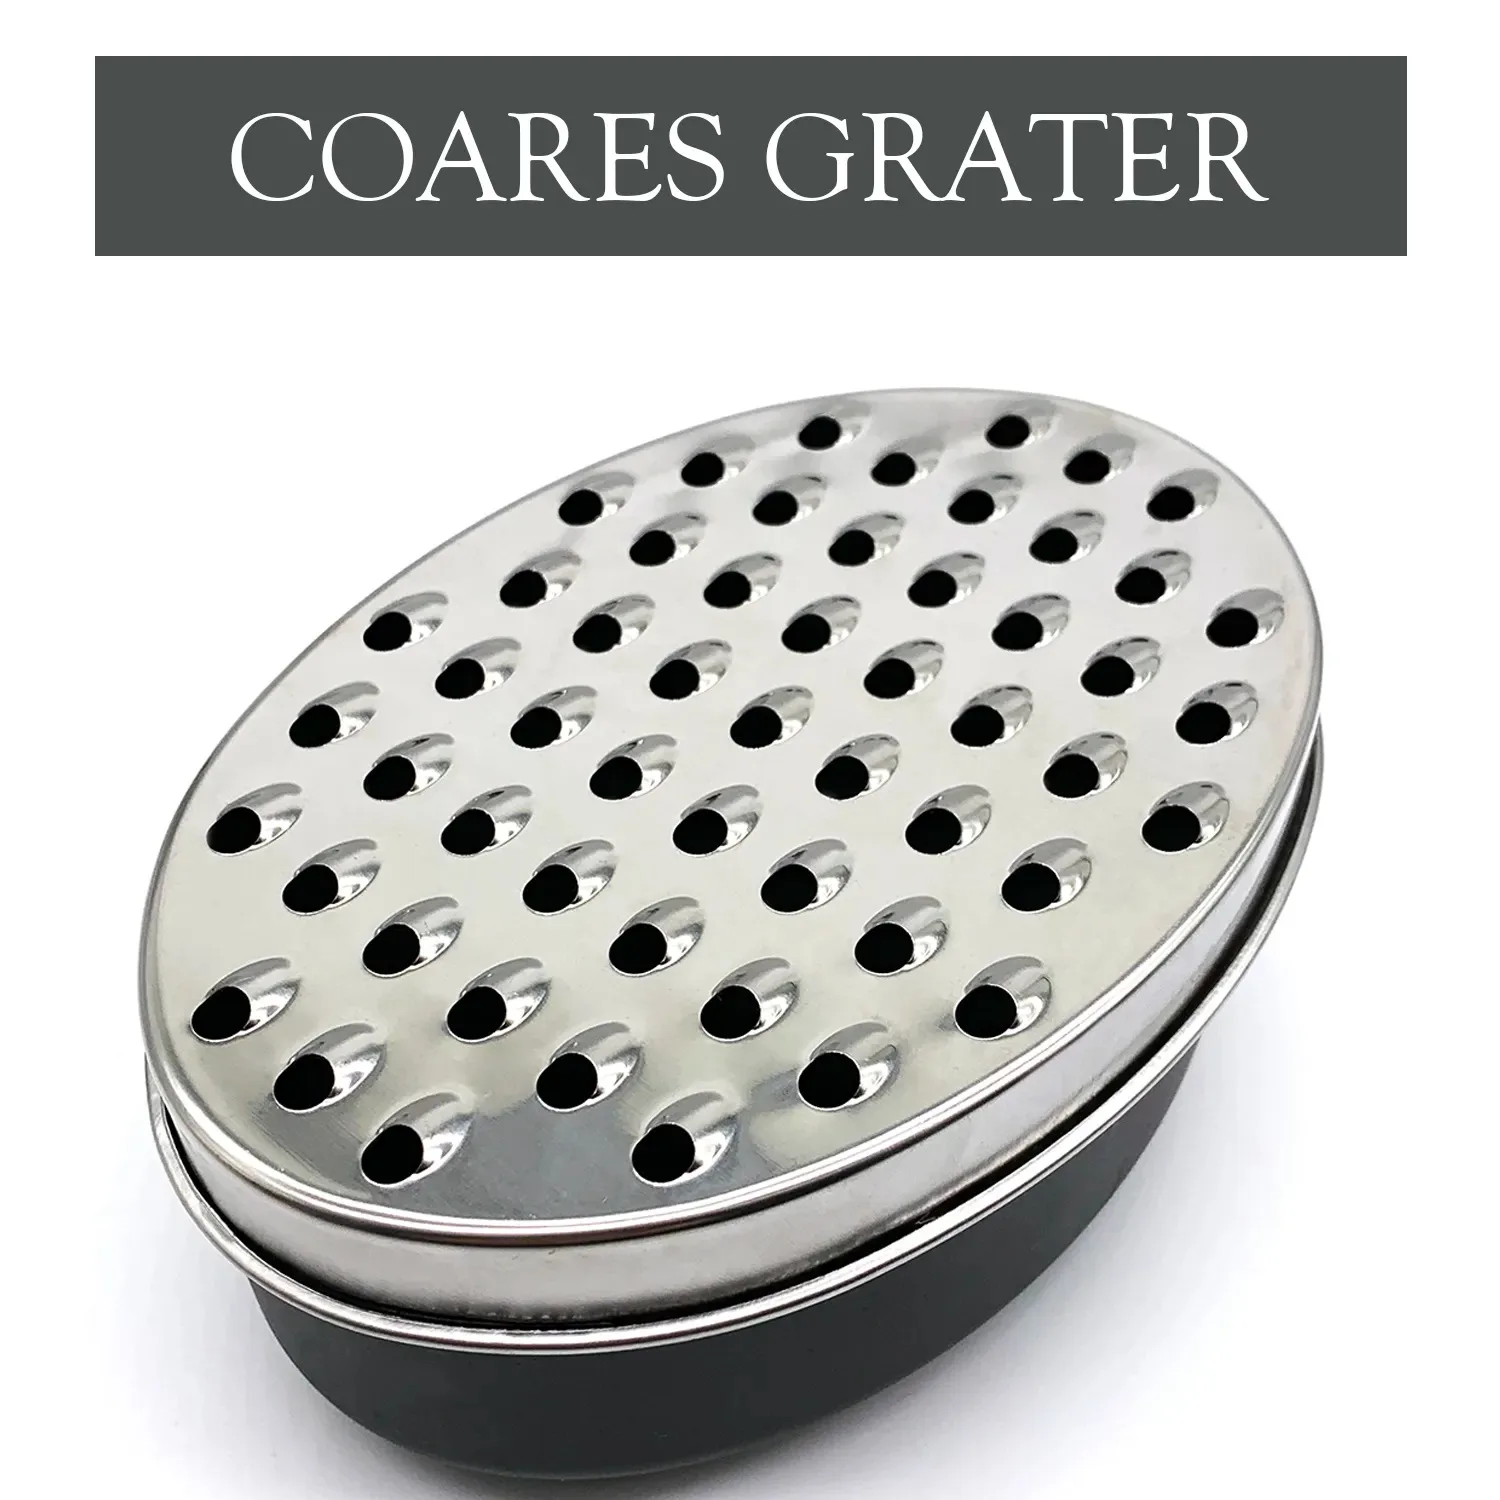 https://ae01.alicdn.com/kf/Sbec8c2642fb7482fac65b9b9b2b7e1b96/Cheese-Grater-Citrus-Lemon-Zester-with-Food-Storage-Container-Lid-Perfect-For-Hard-Parmesan-Or-Soft.jpg